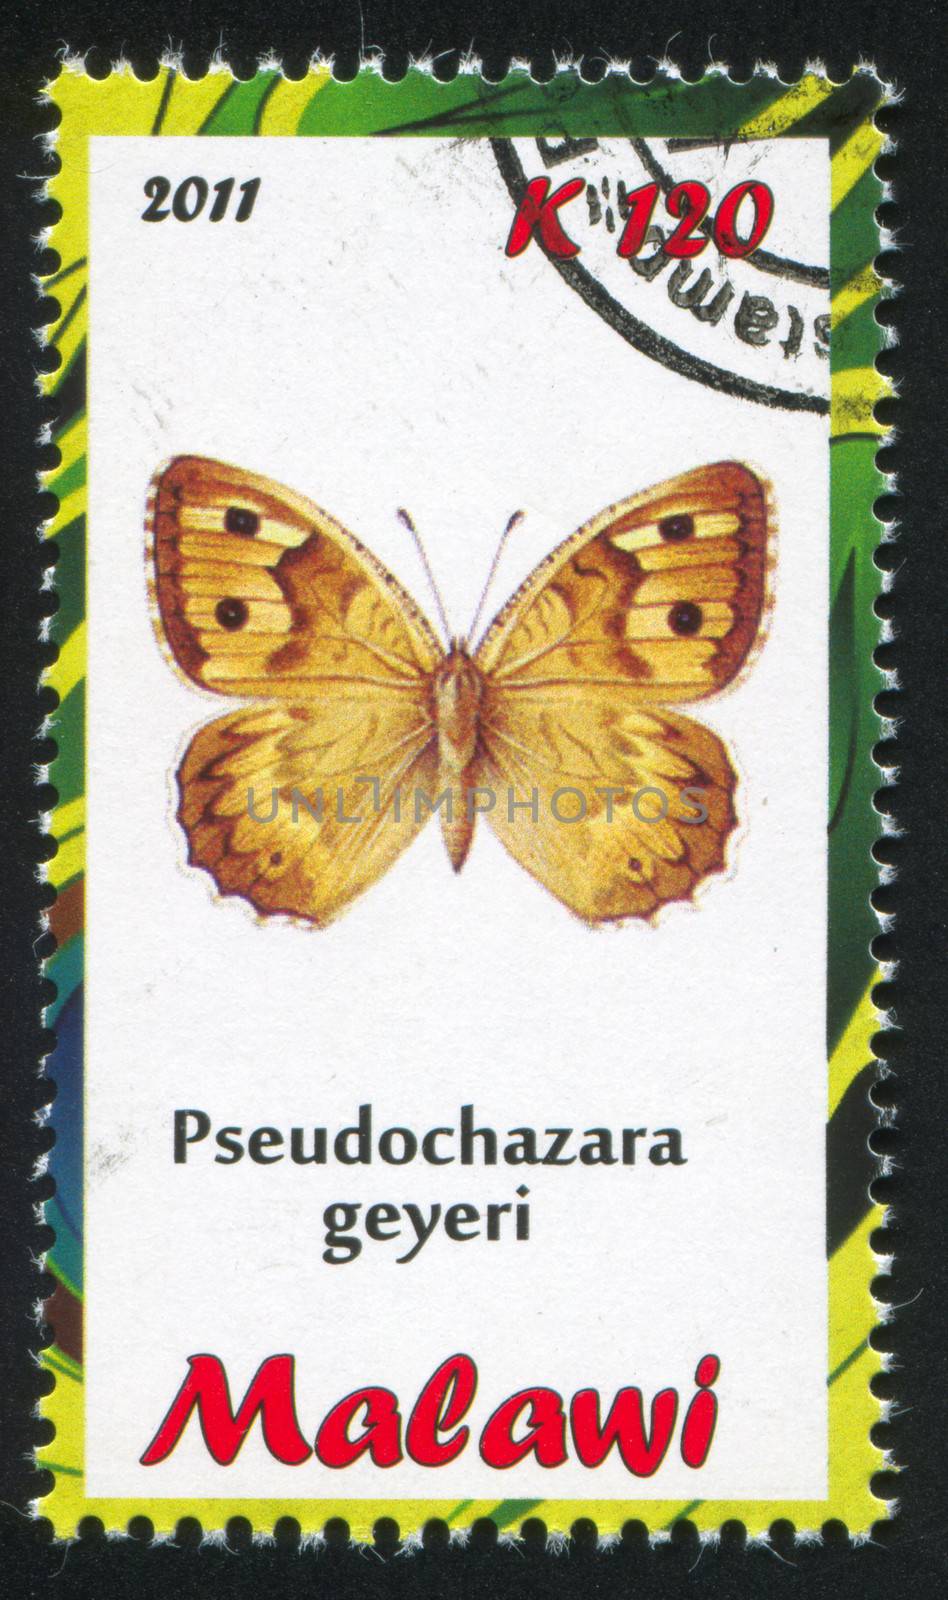 MALAWI - CIRCA 2011: stamp printed by Malawi, shows butterfly, circa 2011